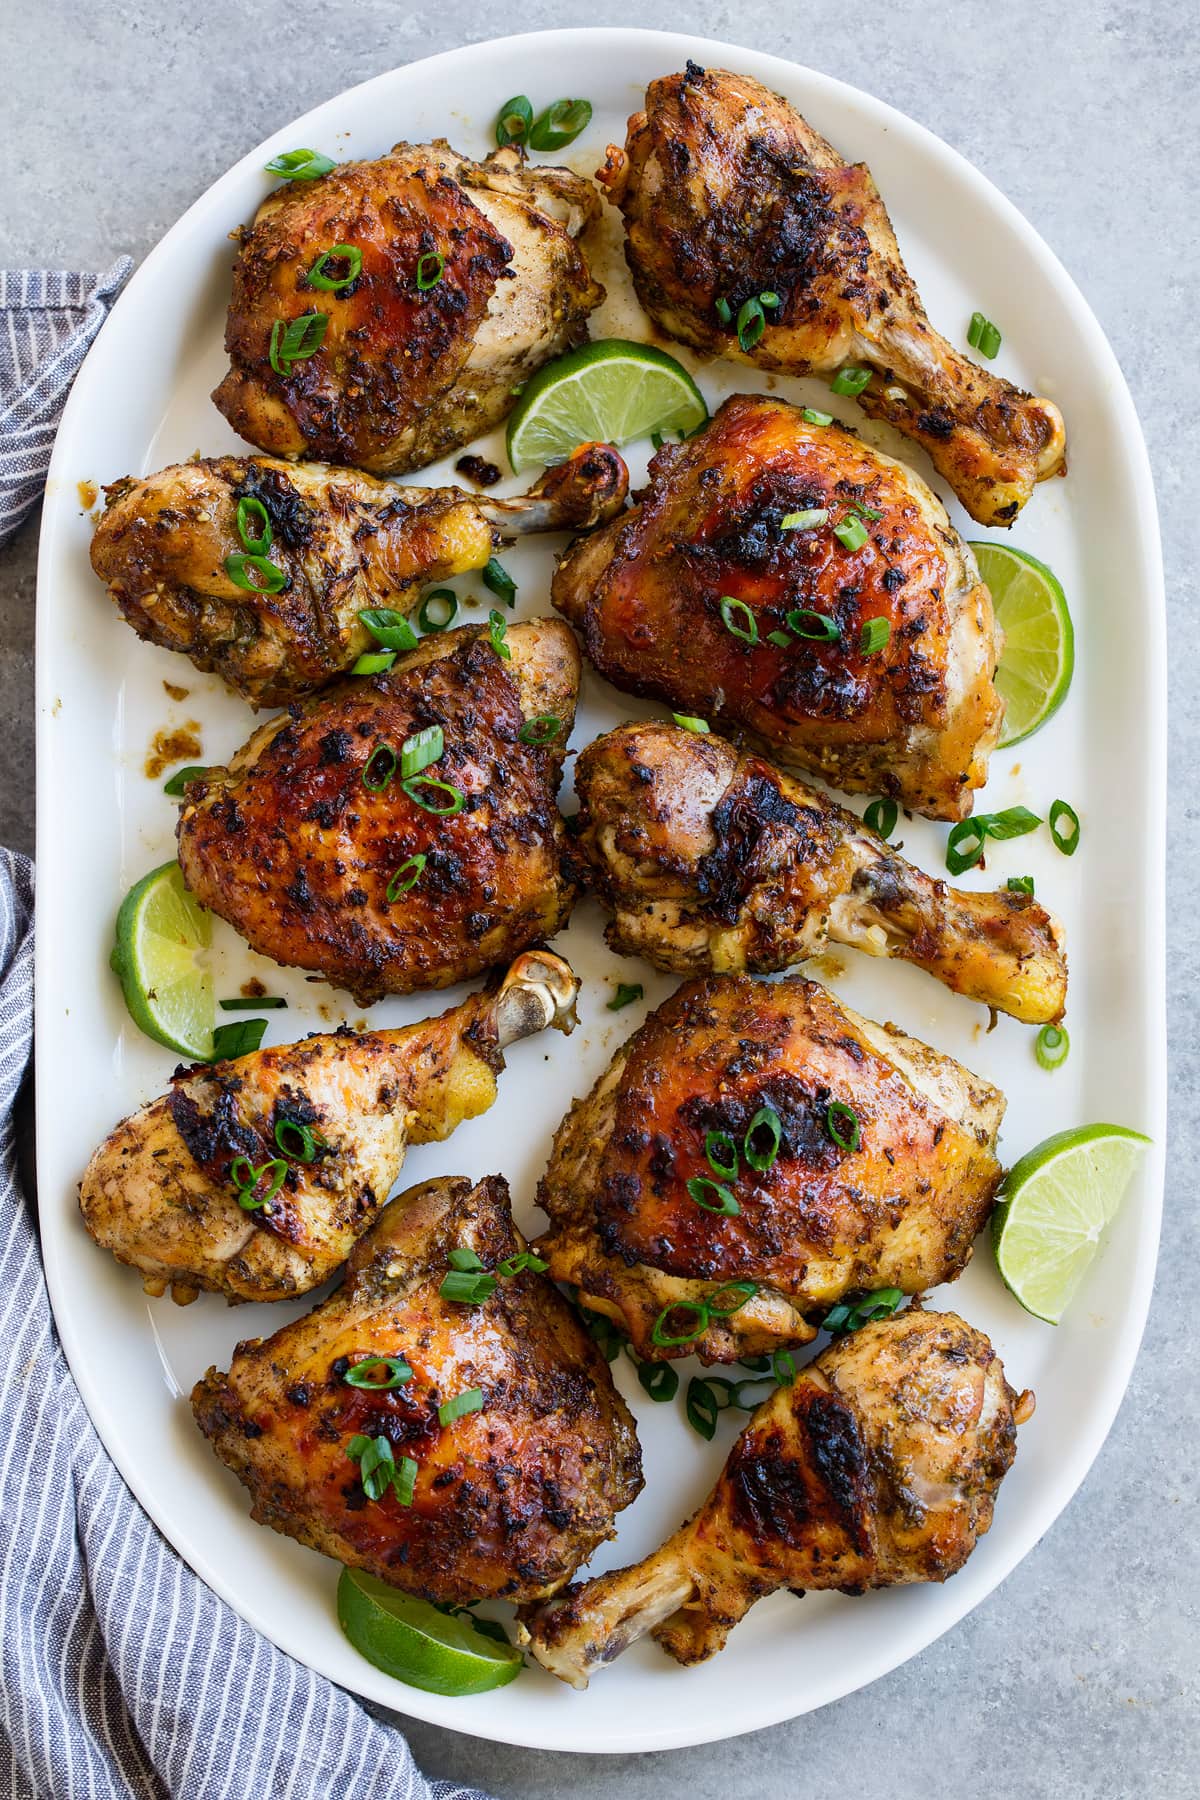 Jerk Chicken Recipe {Oven or Grill Method} - Cooking Classy